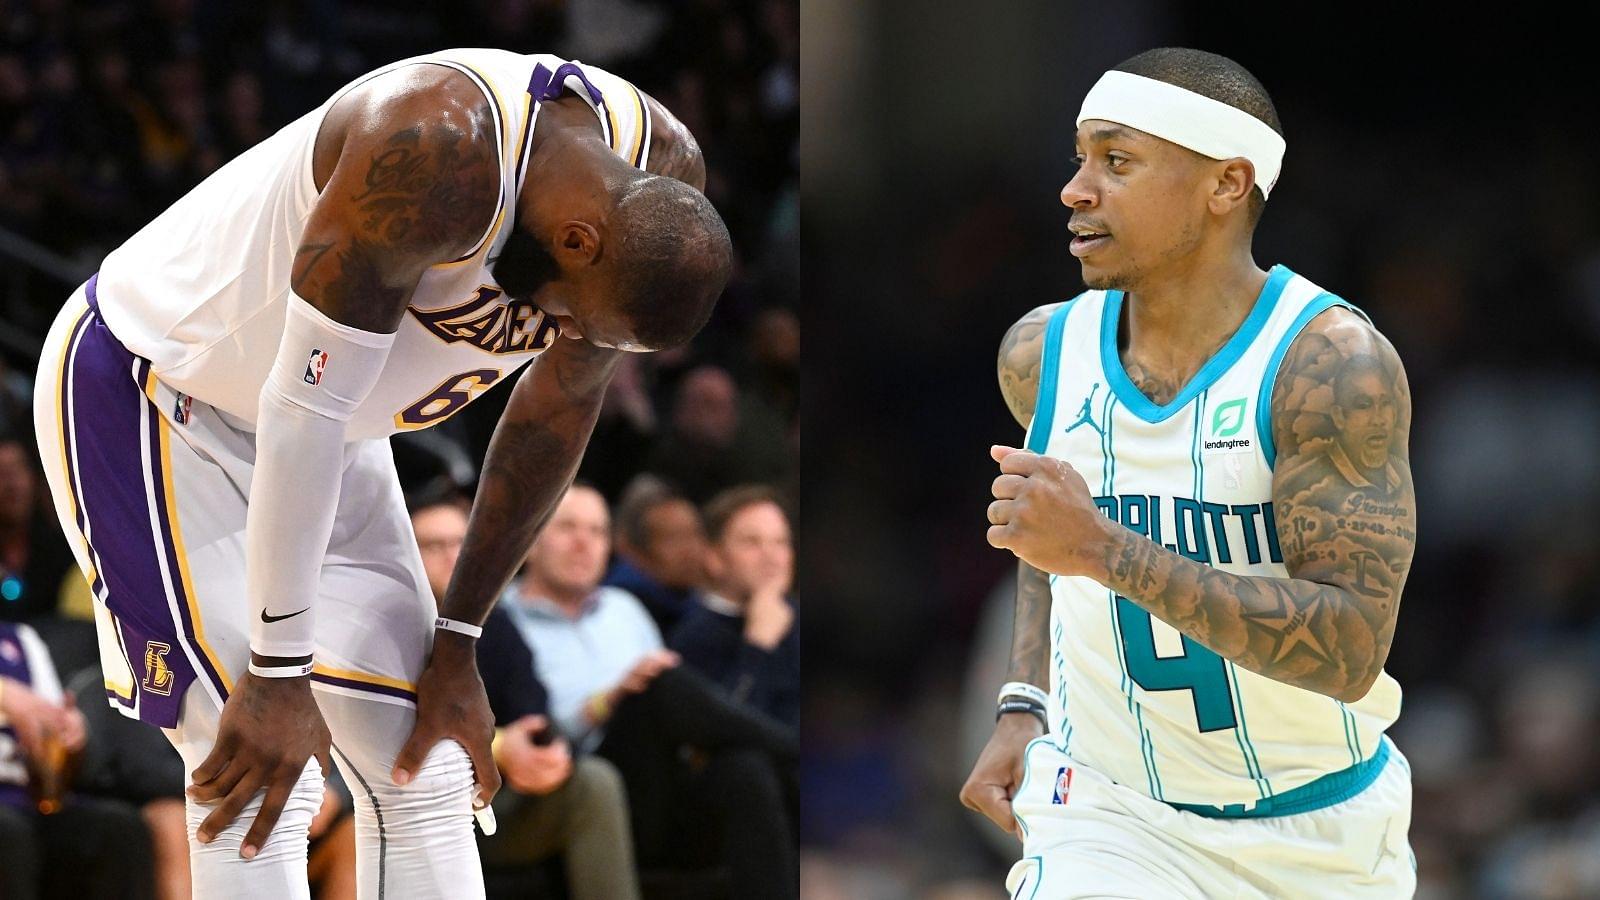 "Stop with the fake love Cuffs the Legend, we don’t get down like that at all!": Isaiah Thomas scuffs off LeBron James' close friend on Twitter as he congratulates him on his Hornets debut